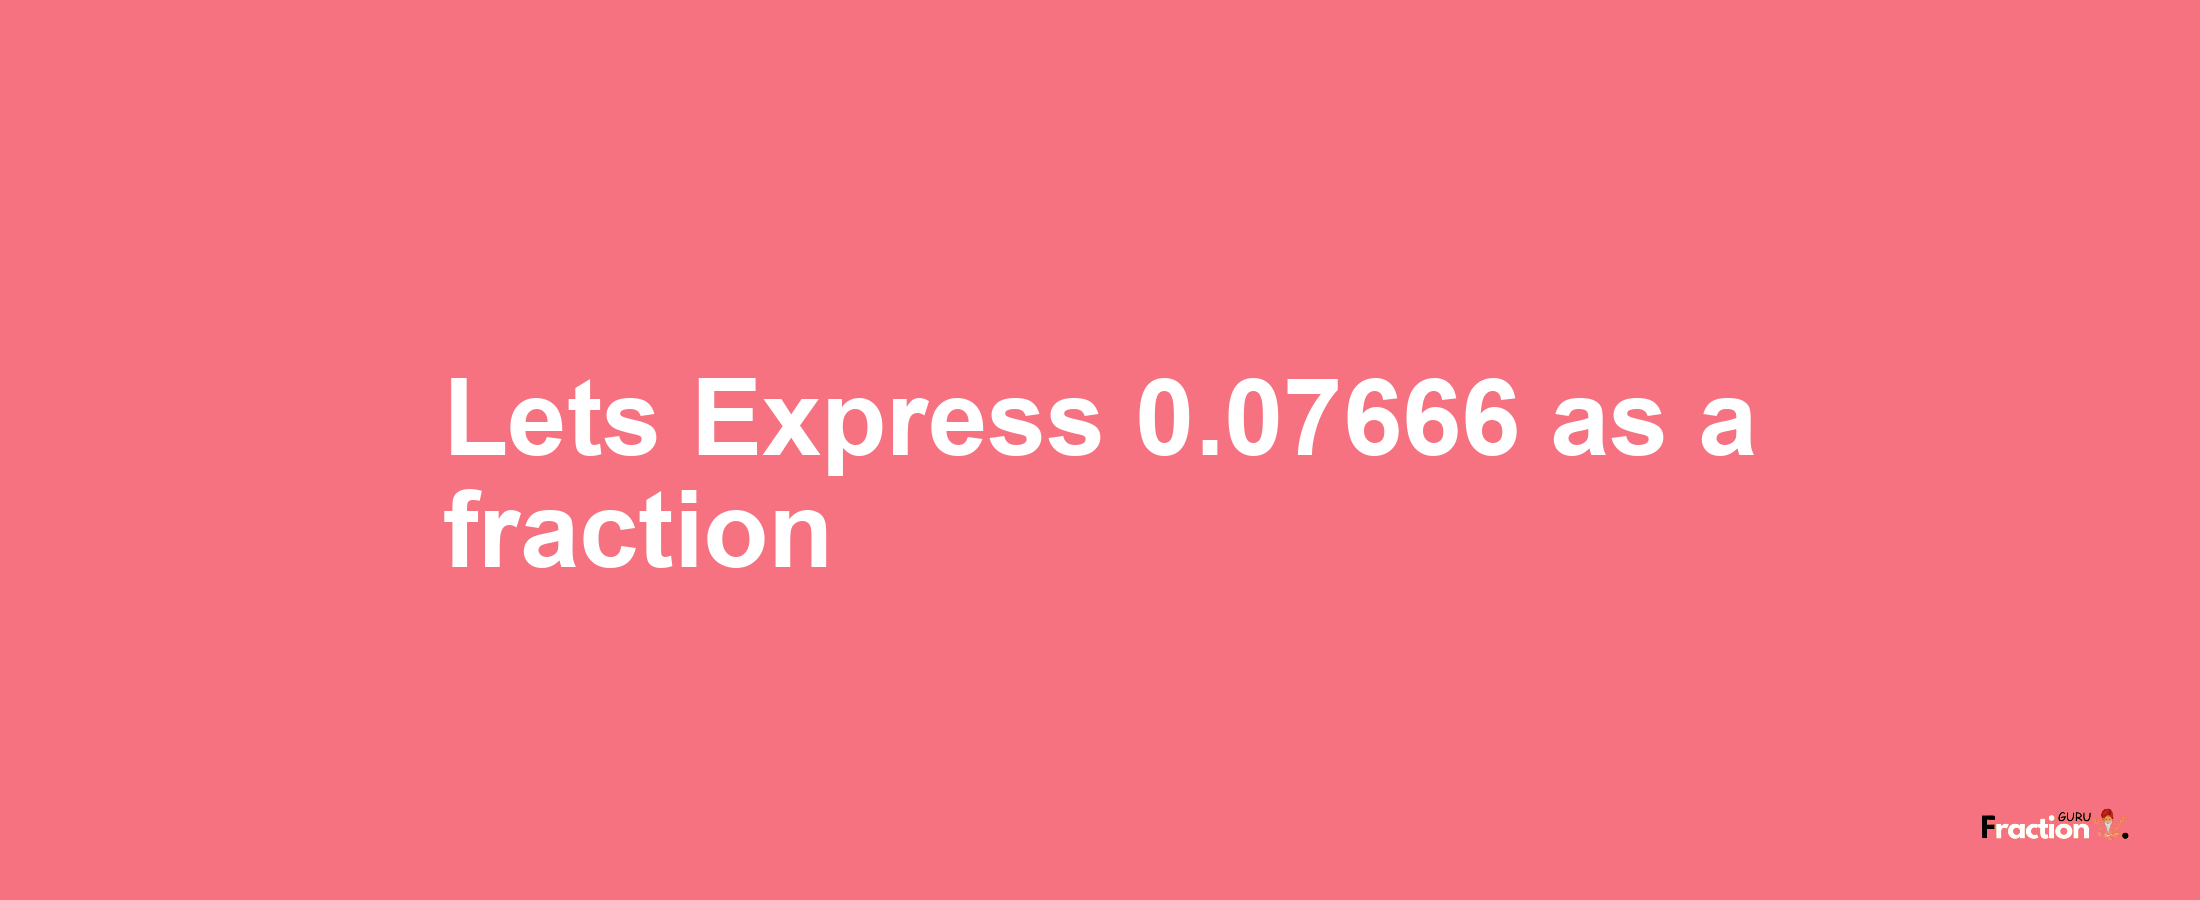 Lets Express 0.07666 as afraction